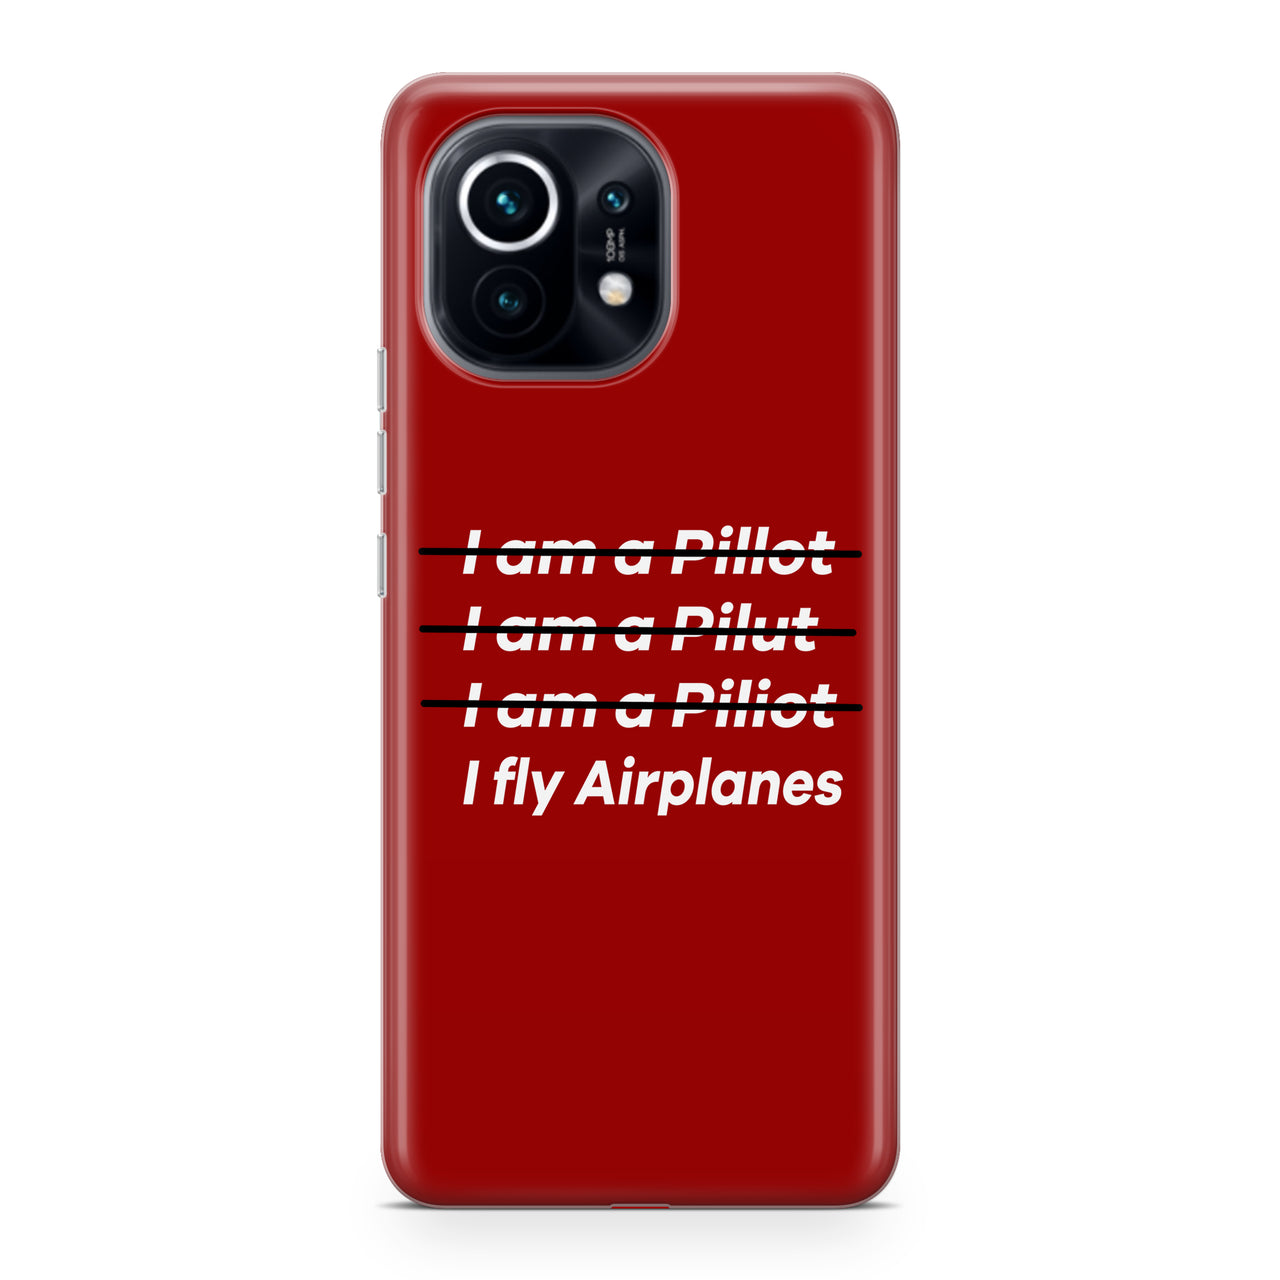 I Fly Airplanes Designed Xiaomi Cases